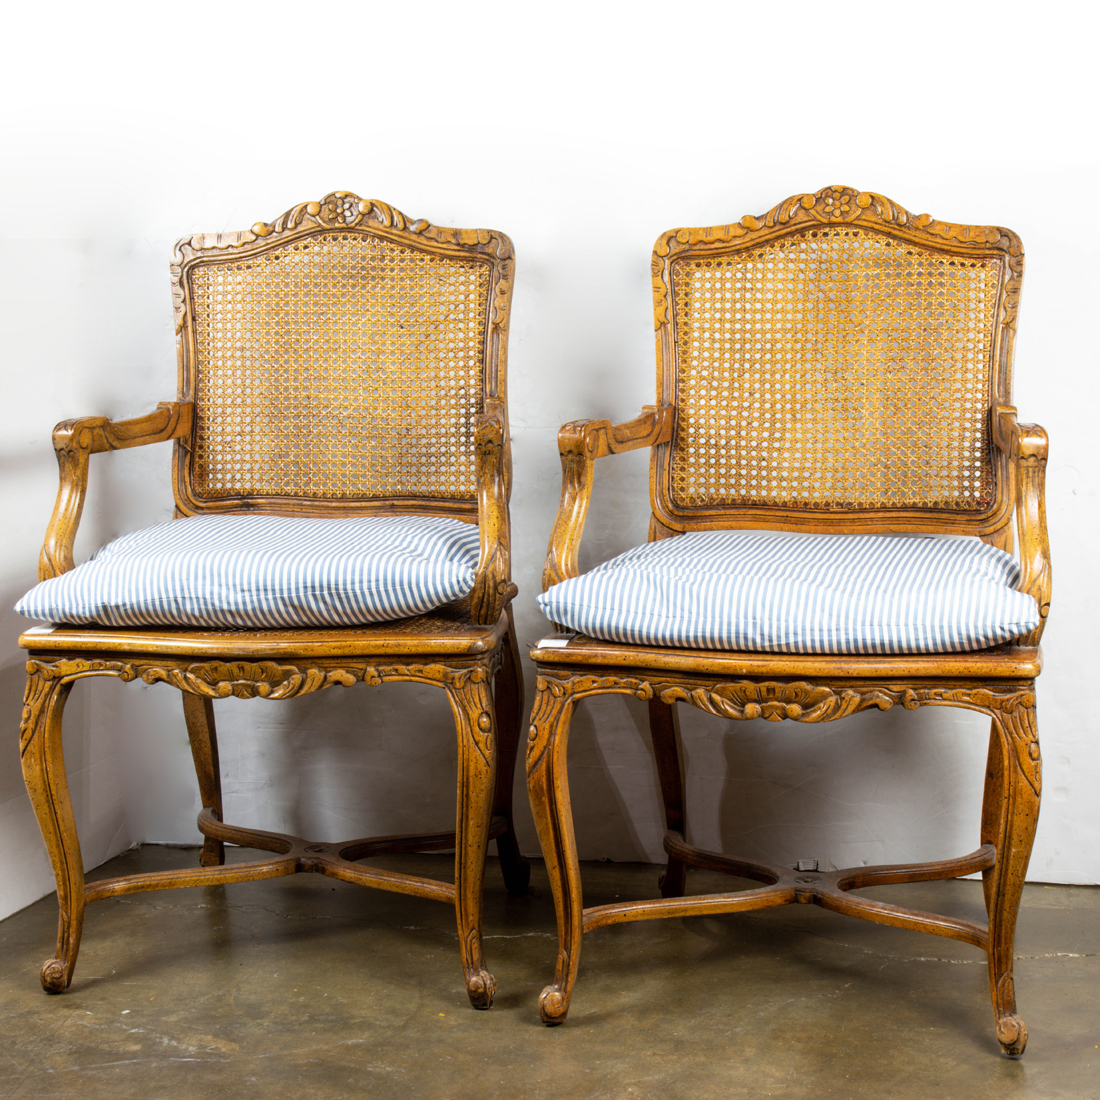 PAIR OF LOUIS XV STYLE CHAIRS Pair 2d28fd